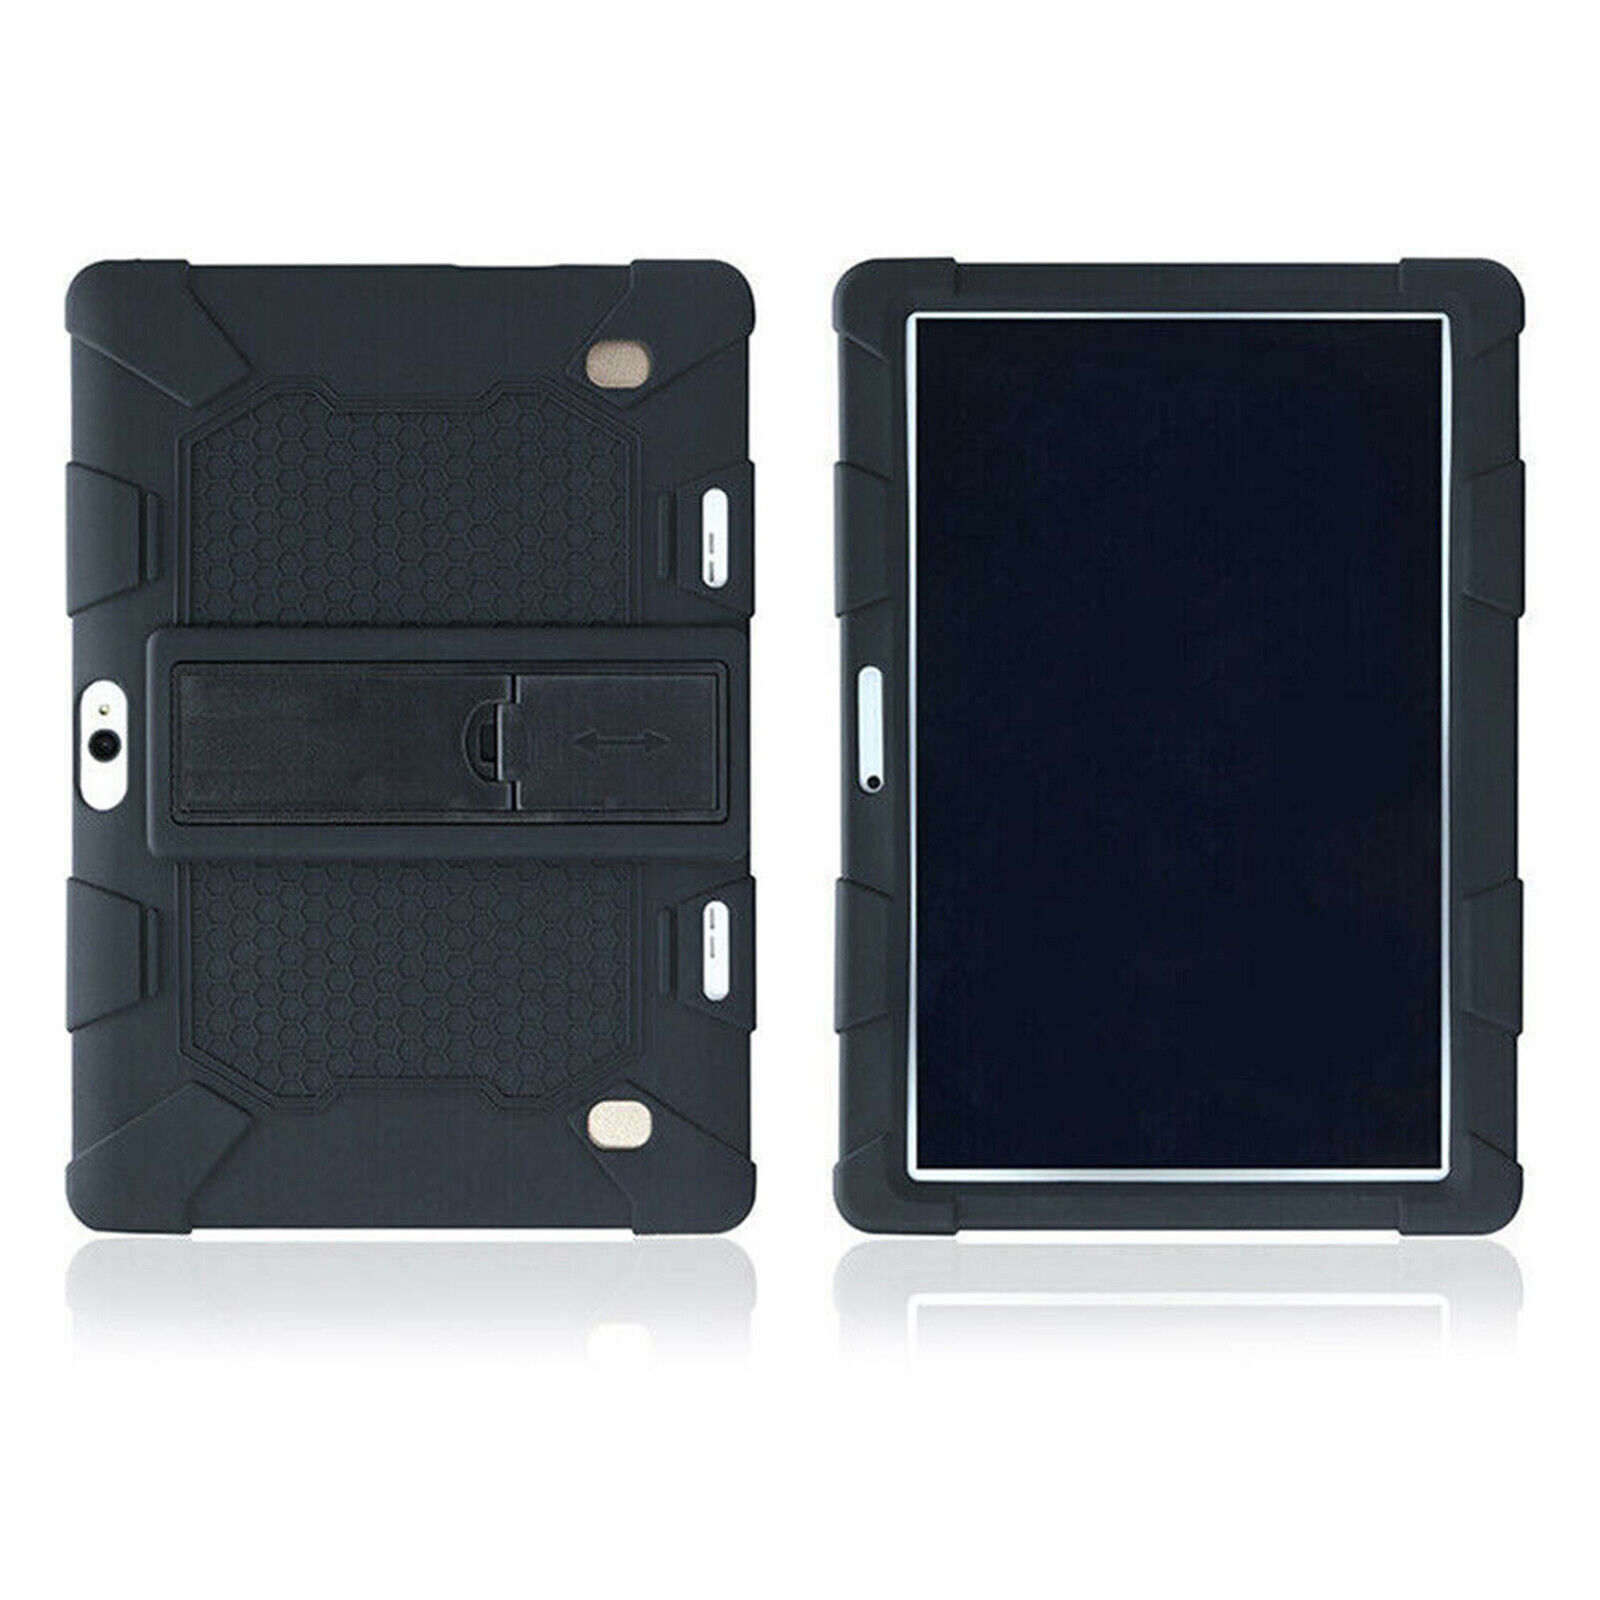 Universal Shockproof Soft Silicone Stand Case Cover For Amazon Tablet US